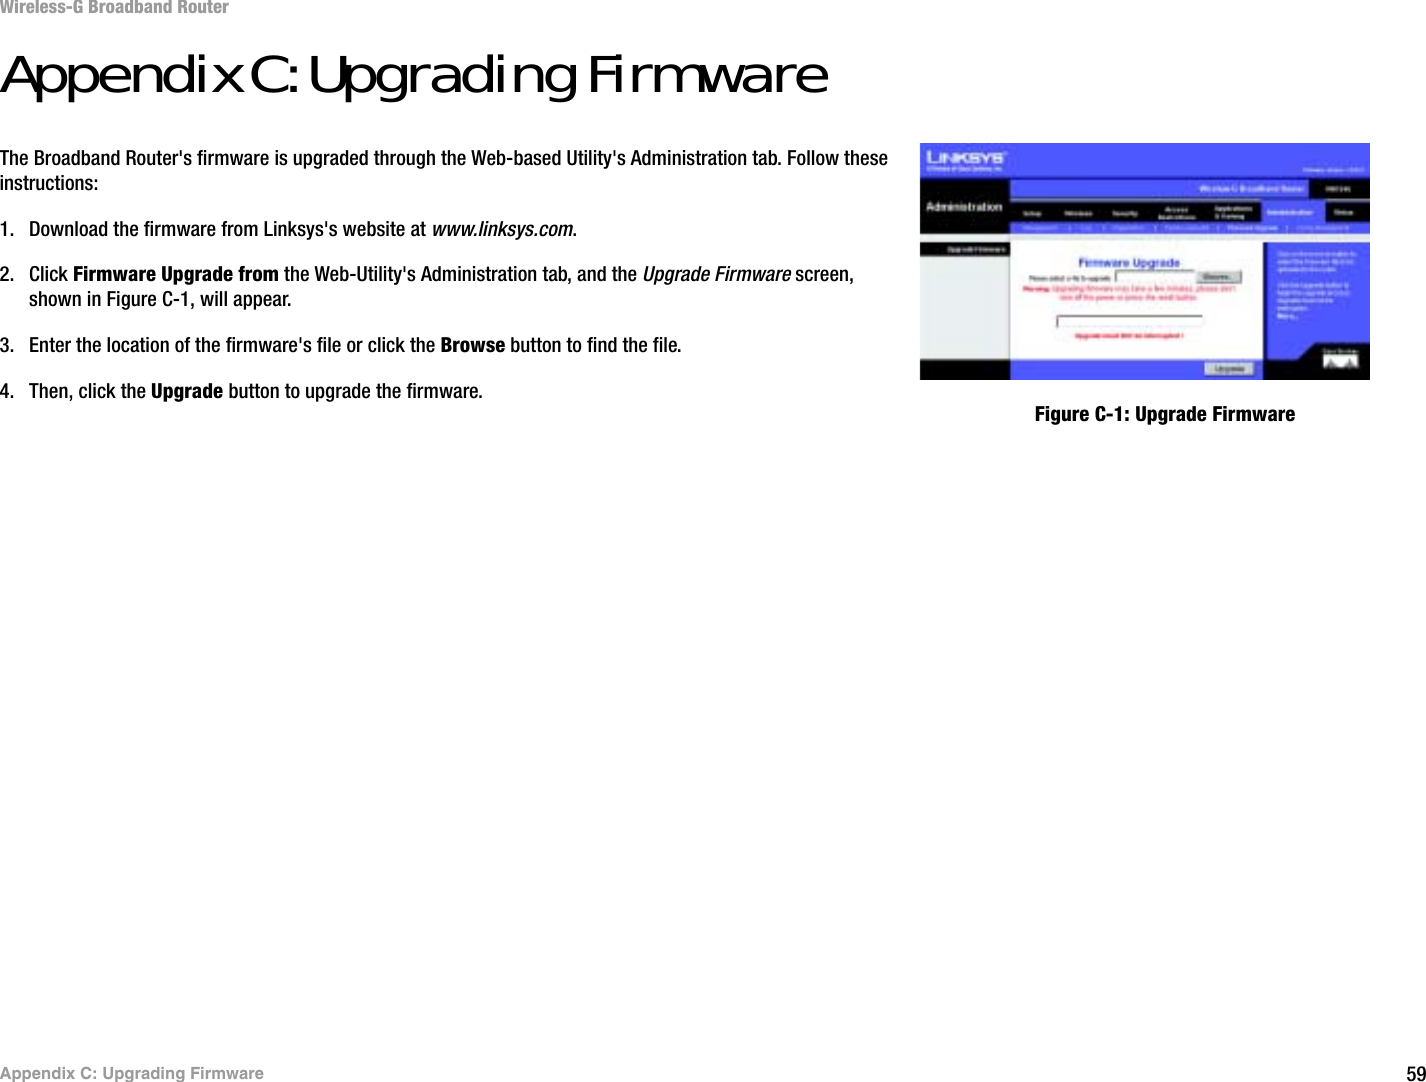 59Appendix C: Upgrading FirmwareWireless-G Broadband RouterAppendix C: Upgrading FirmwareThe Broadband Router&apos;s firmware is upgraded through the Web-based Utility&apos;s Administration tab. Follow these instructions:1. Download the firmware from Linksys&apos;s website at www.linksys.com.2. Click Firmware Upgrade from the Web-Utility&apos;s Administration tab, and the Upgrade Firmware screen, shown in Figure C-1, will appear.3. Enter the location of the firmware&apos;s file or click the Browse button to find the file. 4. Then, click the Upgrade button to upgrade the firmware.Figure C-1: Upgrade Firmware